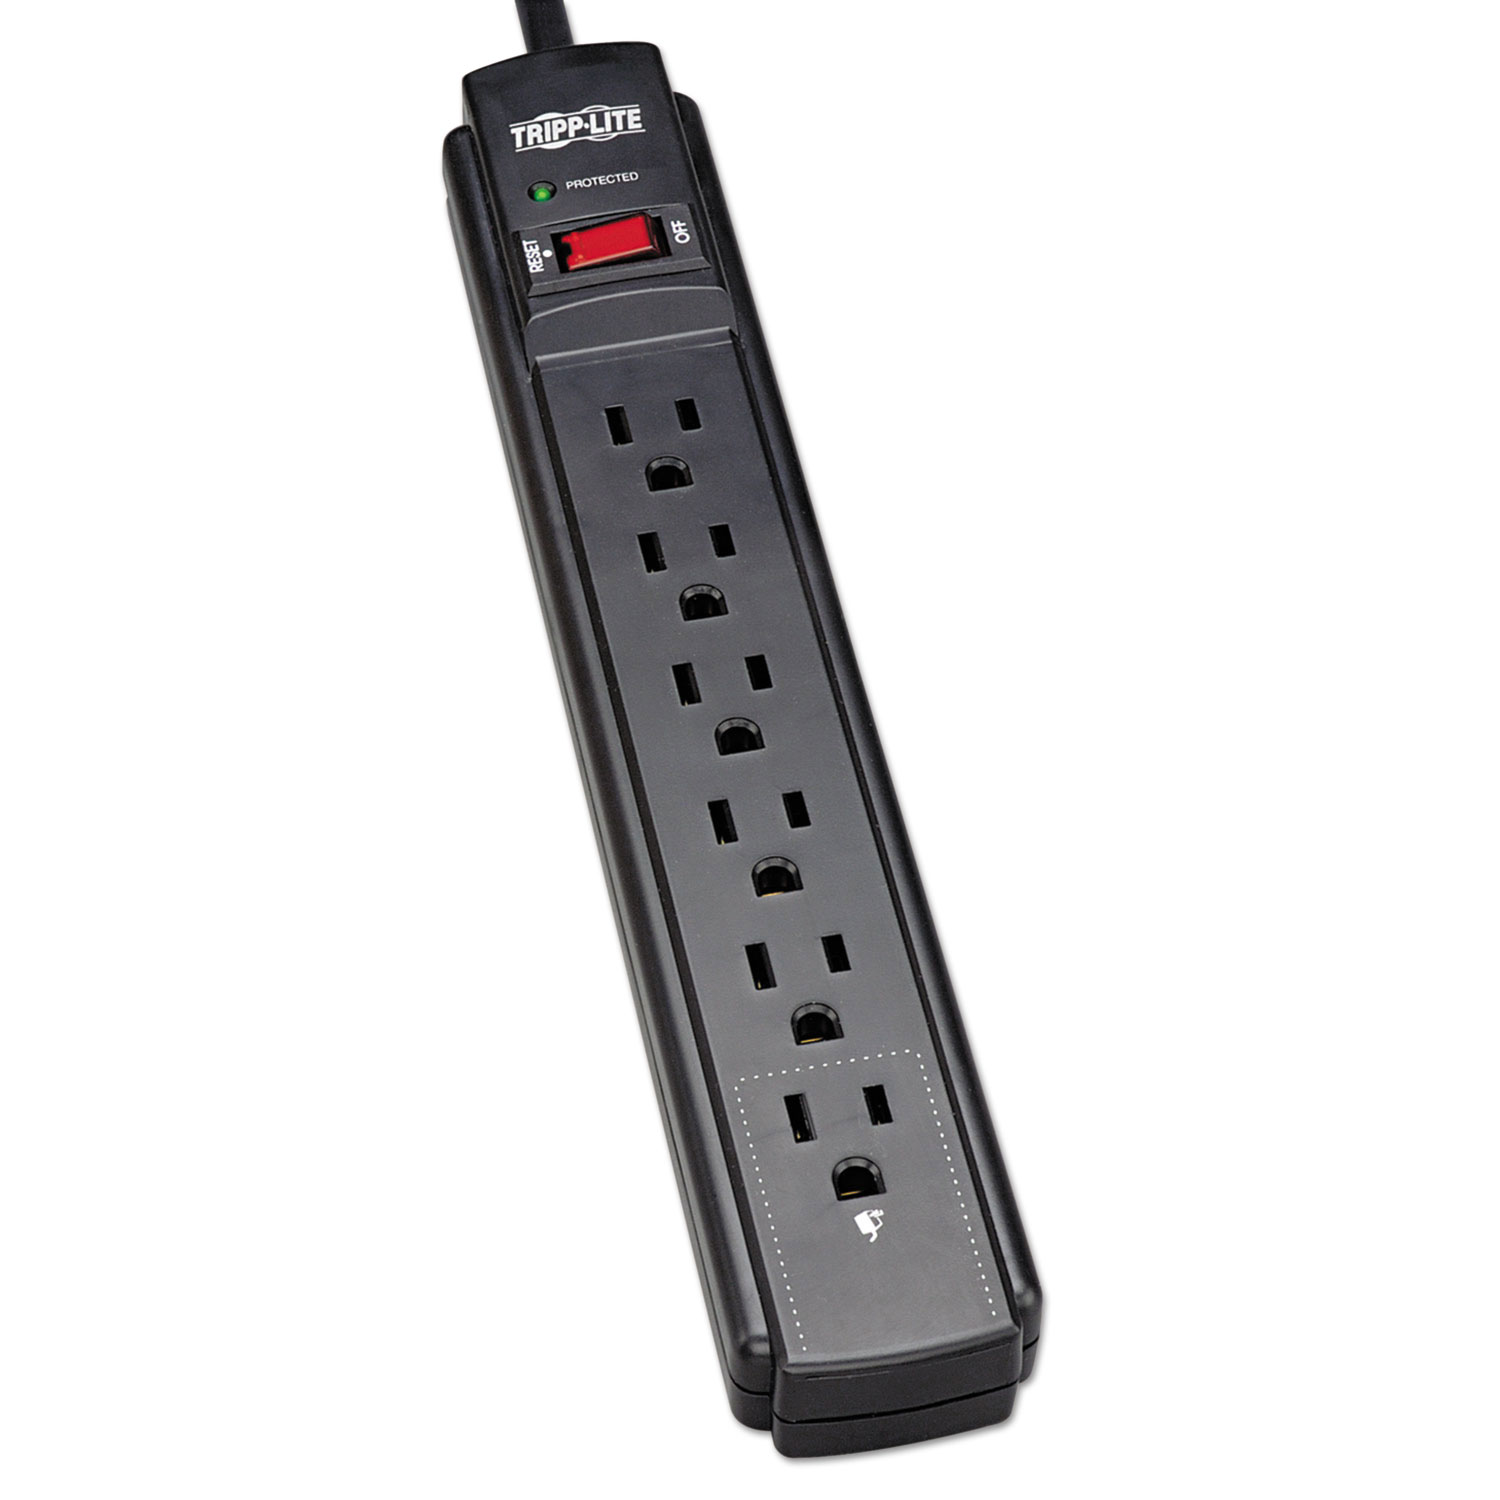  Tripp Lite TLP606B Protect It! Surge Protector, 6 Outlets, 6 ft. Cord, 790 Joules, Black (TRPTLP606B) 